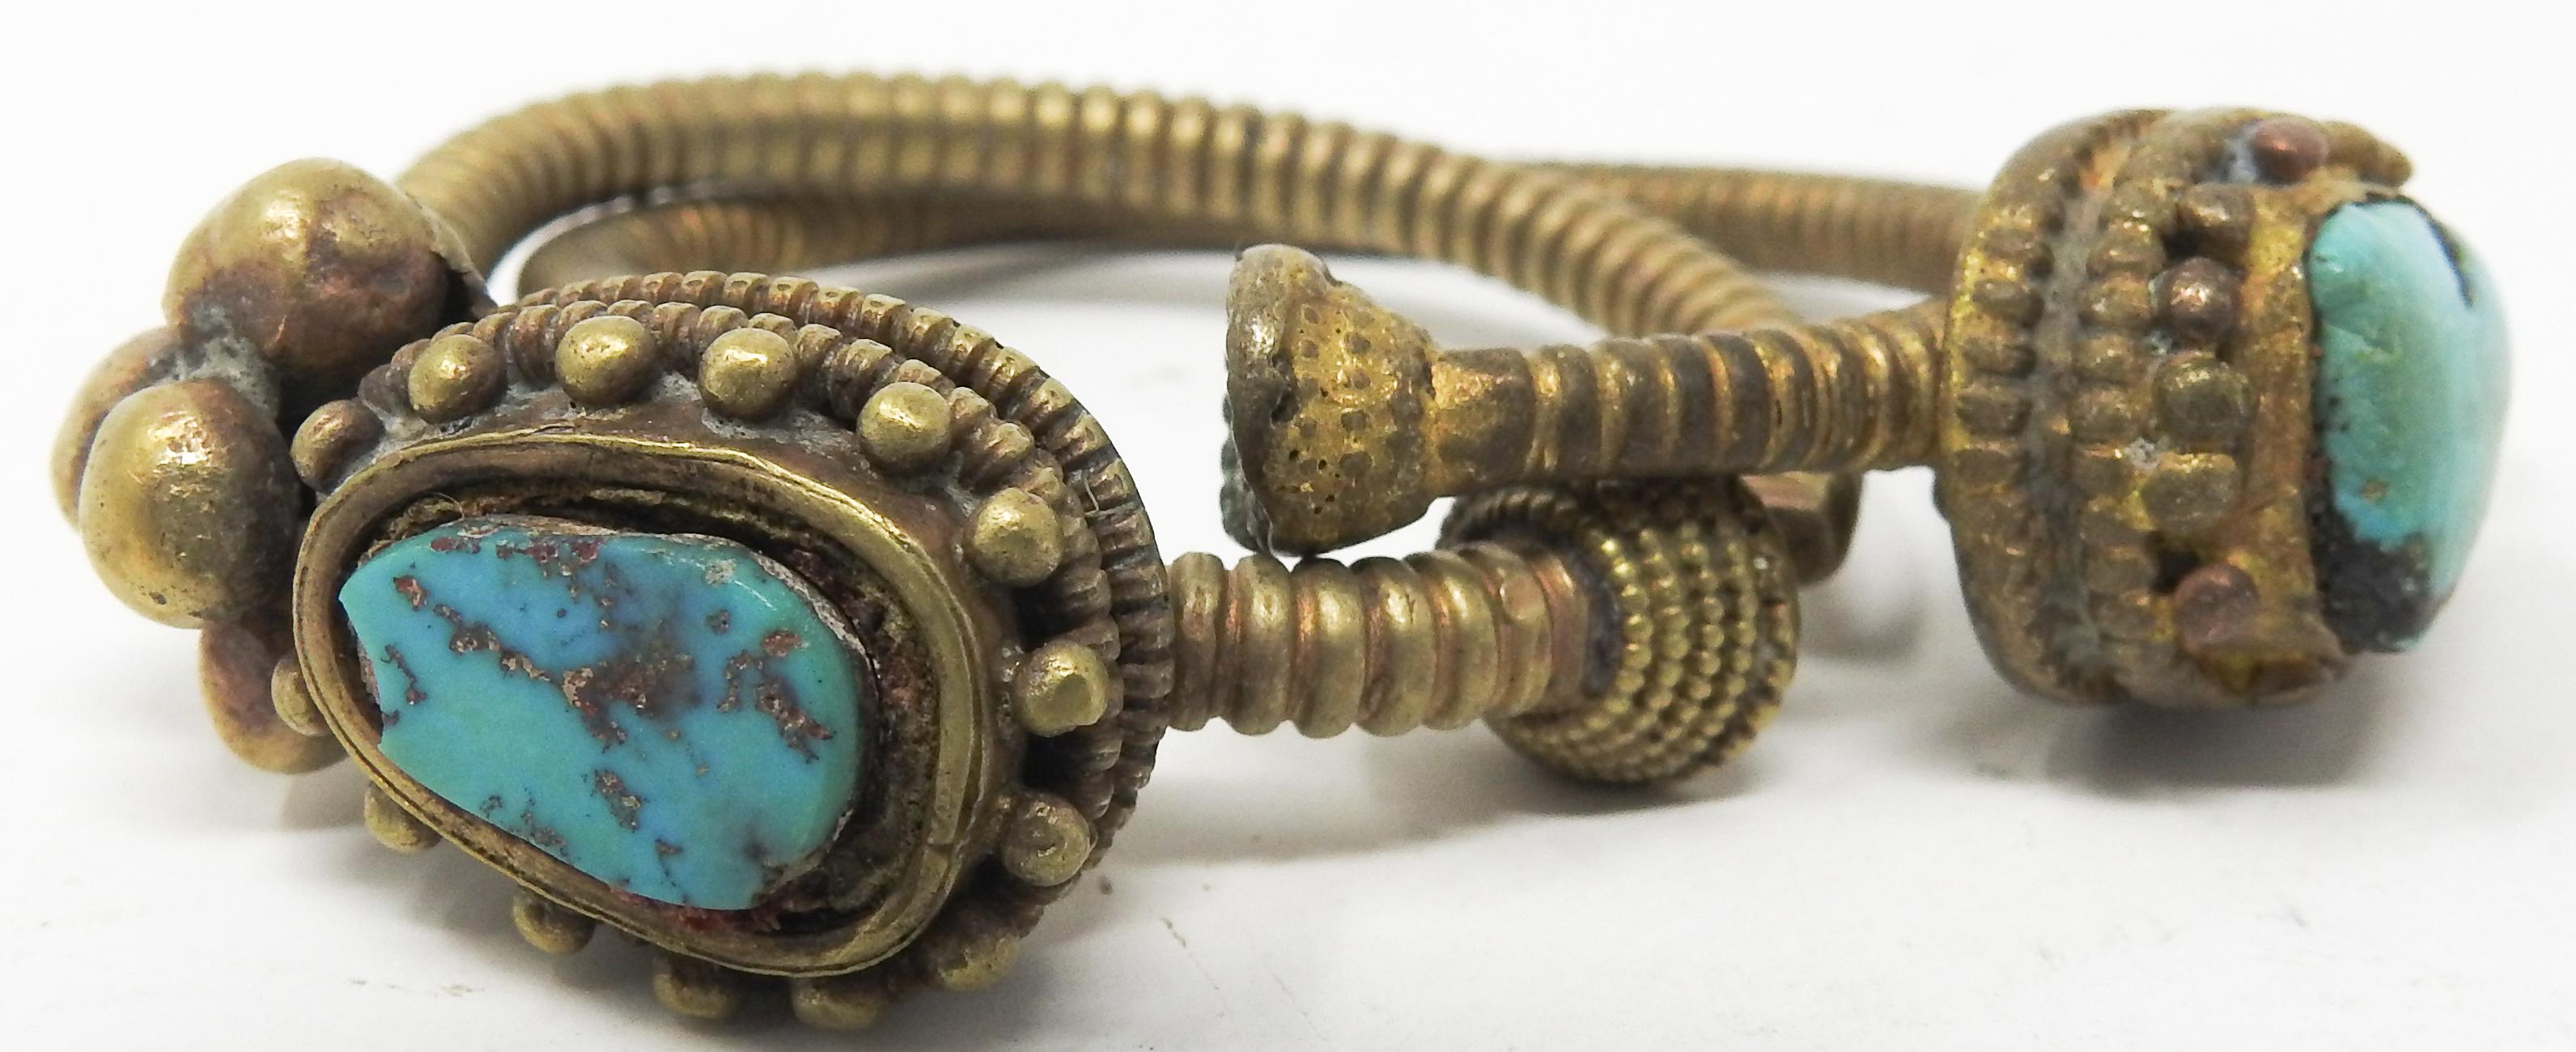 Offering this stunning pair of Tibetan bronze and turquoise clip-on earrings. The stones stand out against the aged bronze patina. These are handcrafted. The push together too close.